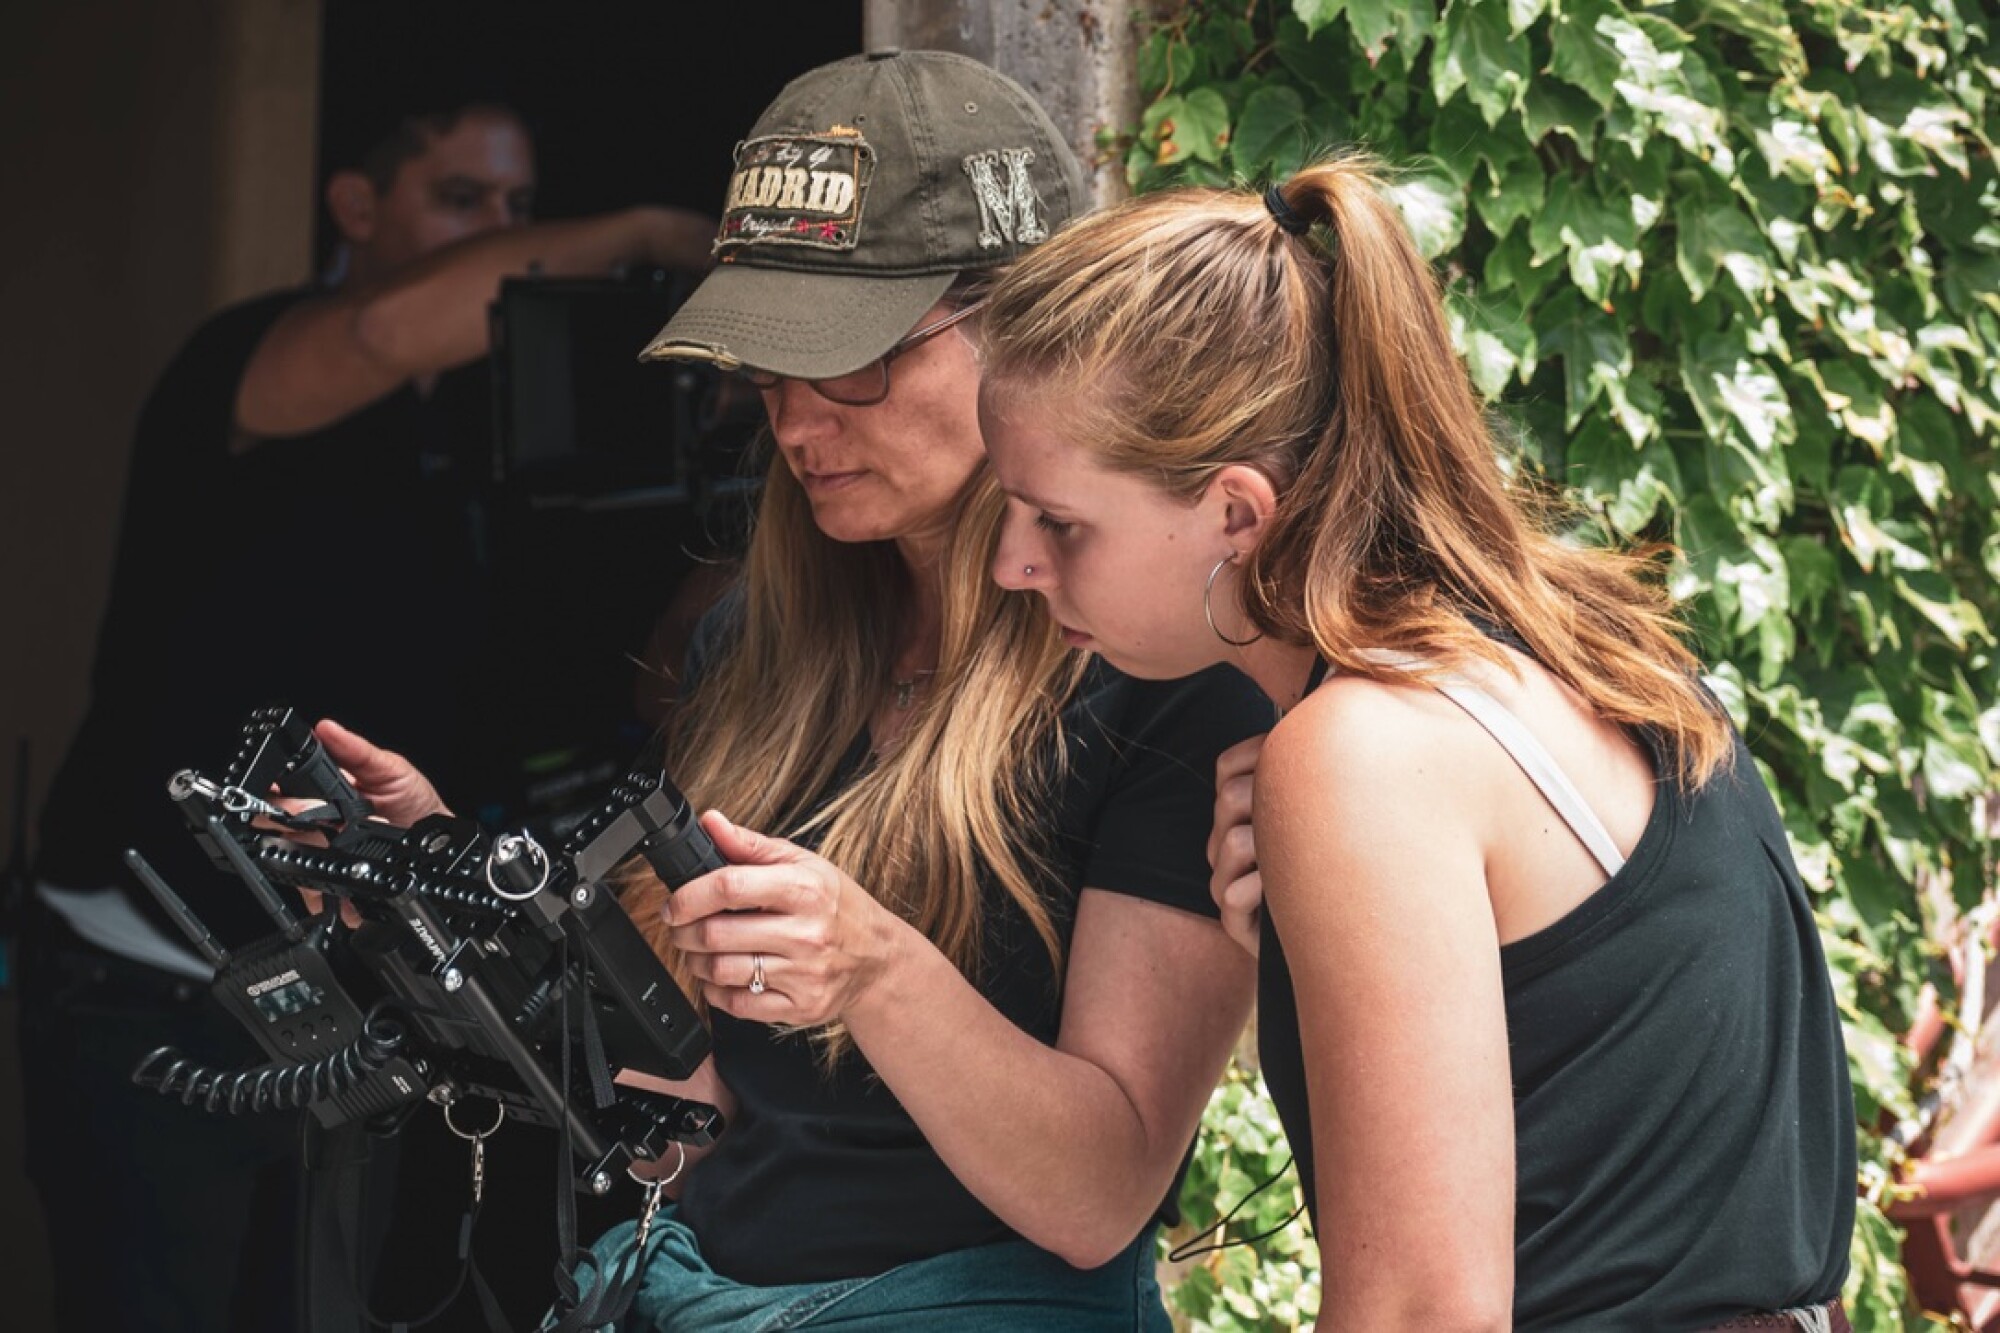 Director Maggie Mahrt, left, reviews a shot with Katie Gerlach during shooting of "O, Brawling Love!"